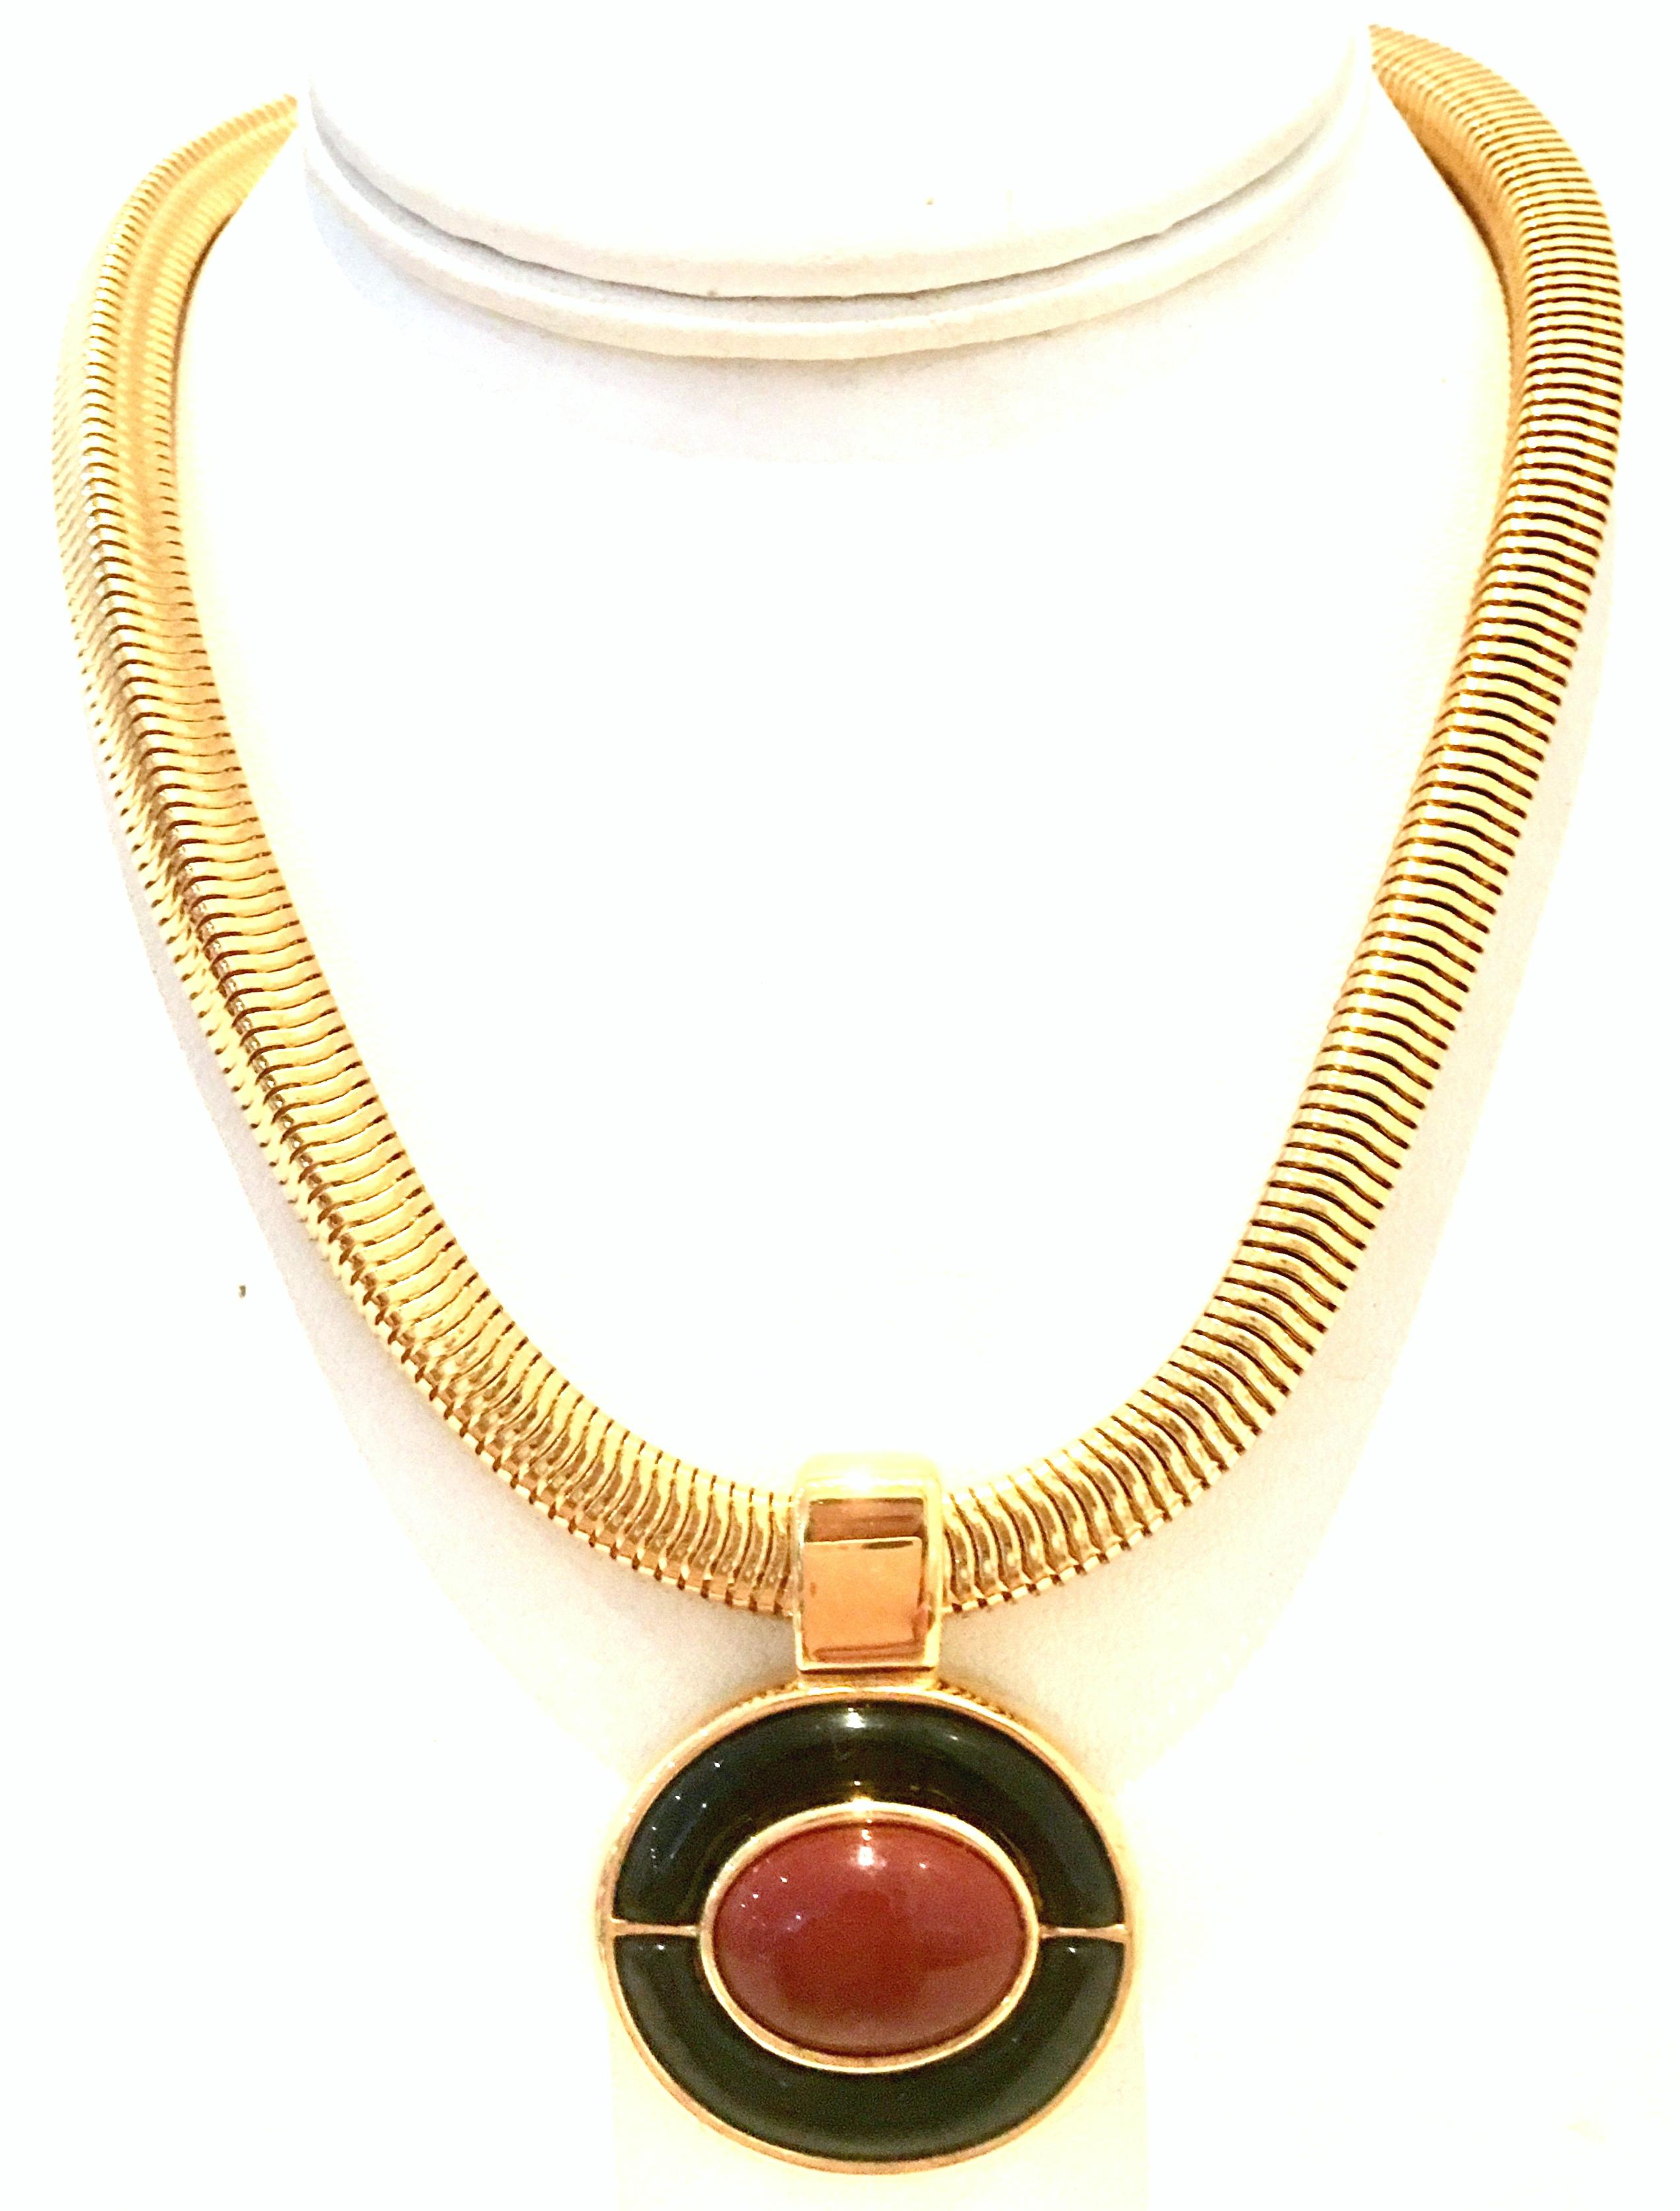 1980'S Gold Plate & Enamel Abstract Pendant Choker Style Necklace By, Monet. This chunky and substantial choker style necklace features an Art Deco inspired gold plate and black enamel with faux carnelian central stone pendant. The necklace is .25